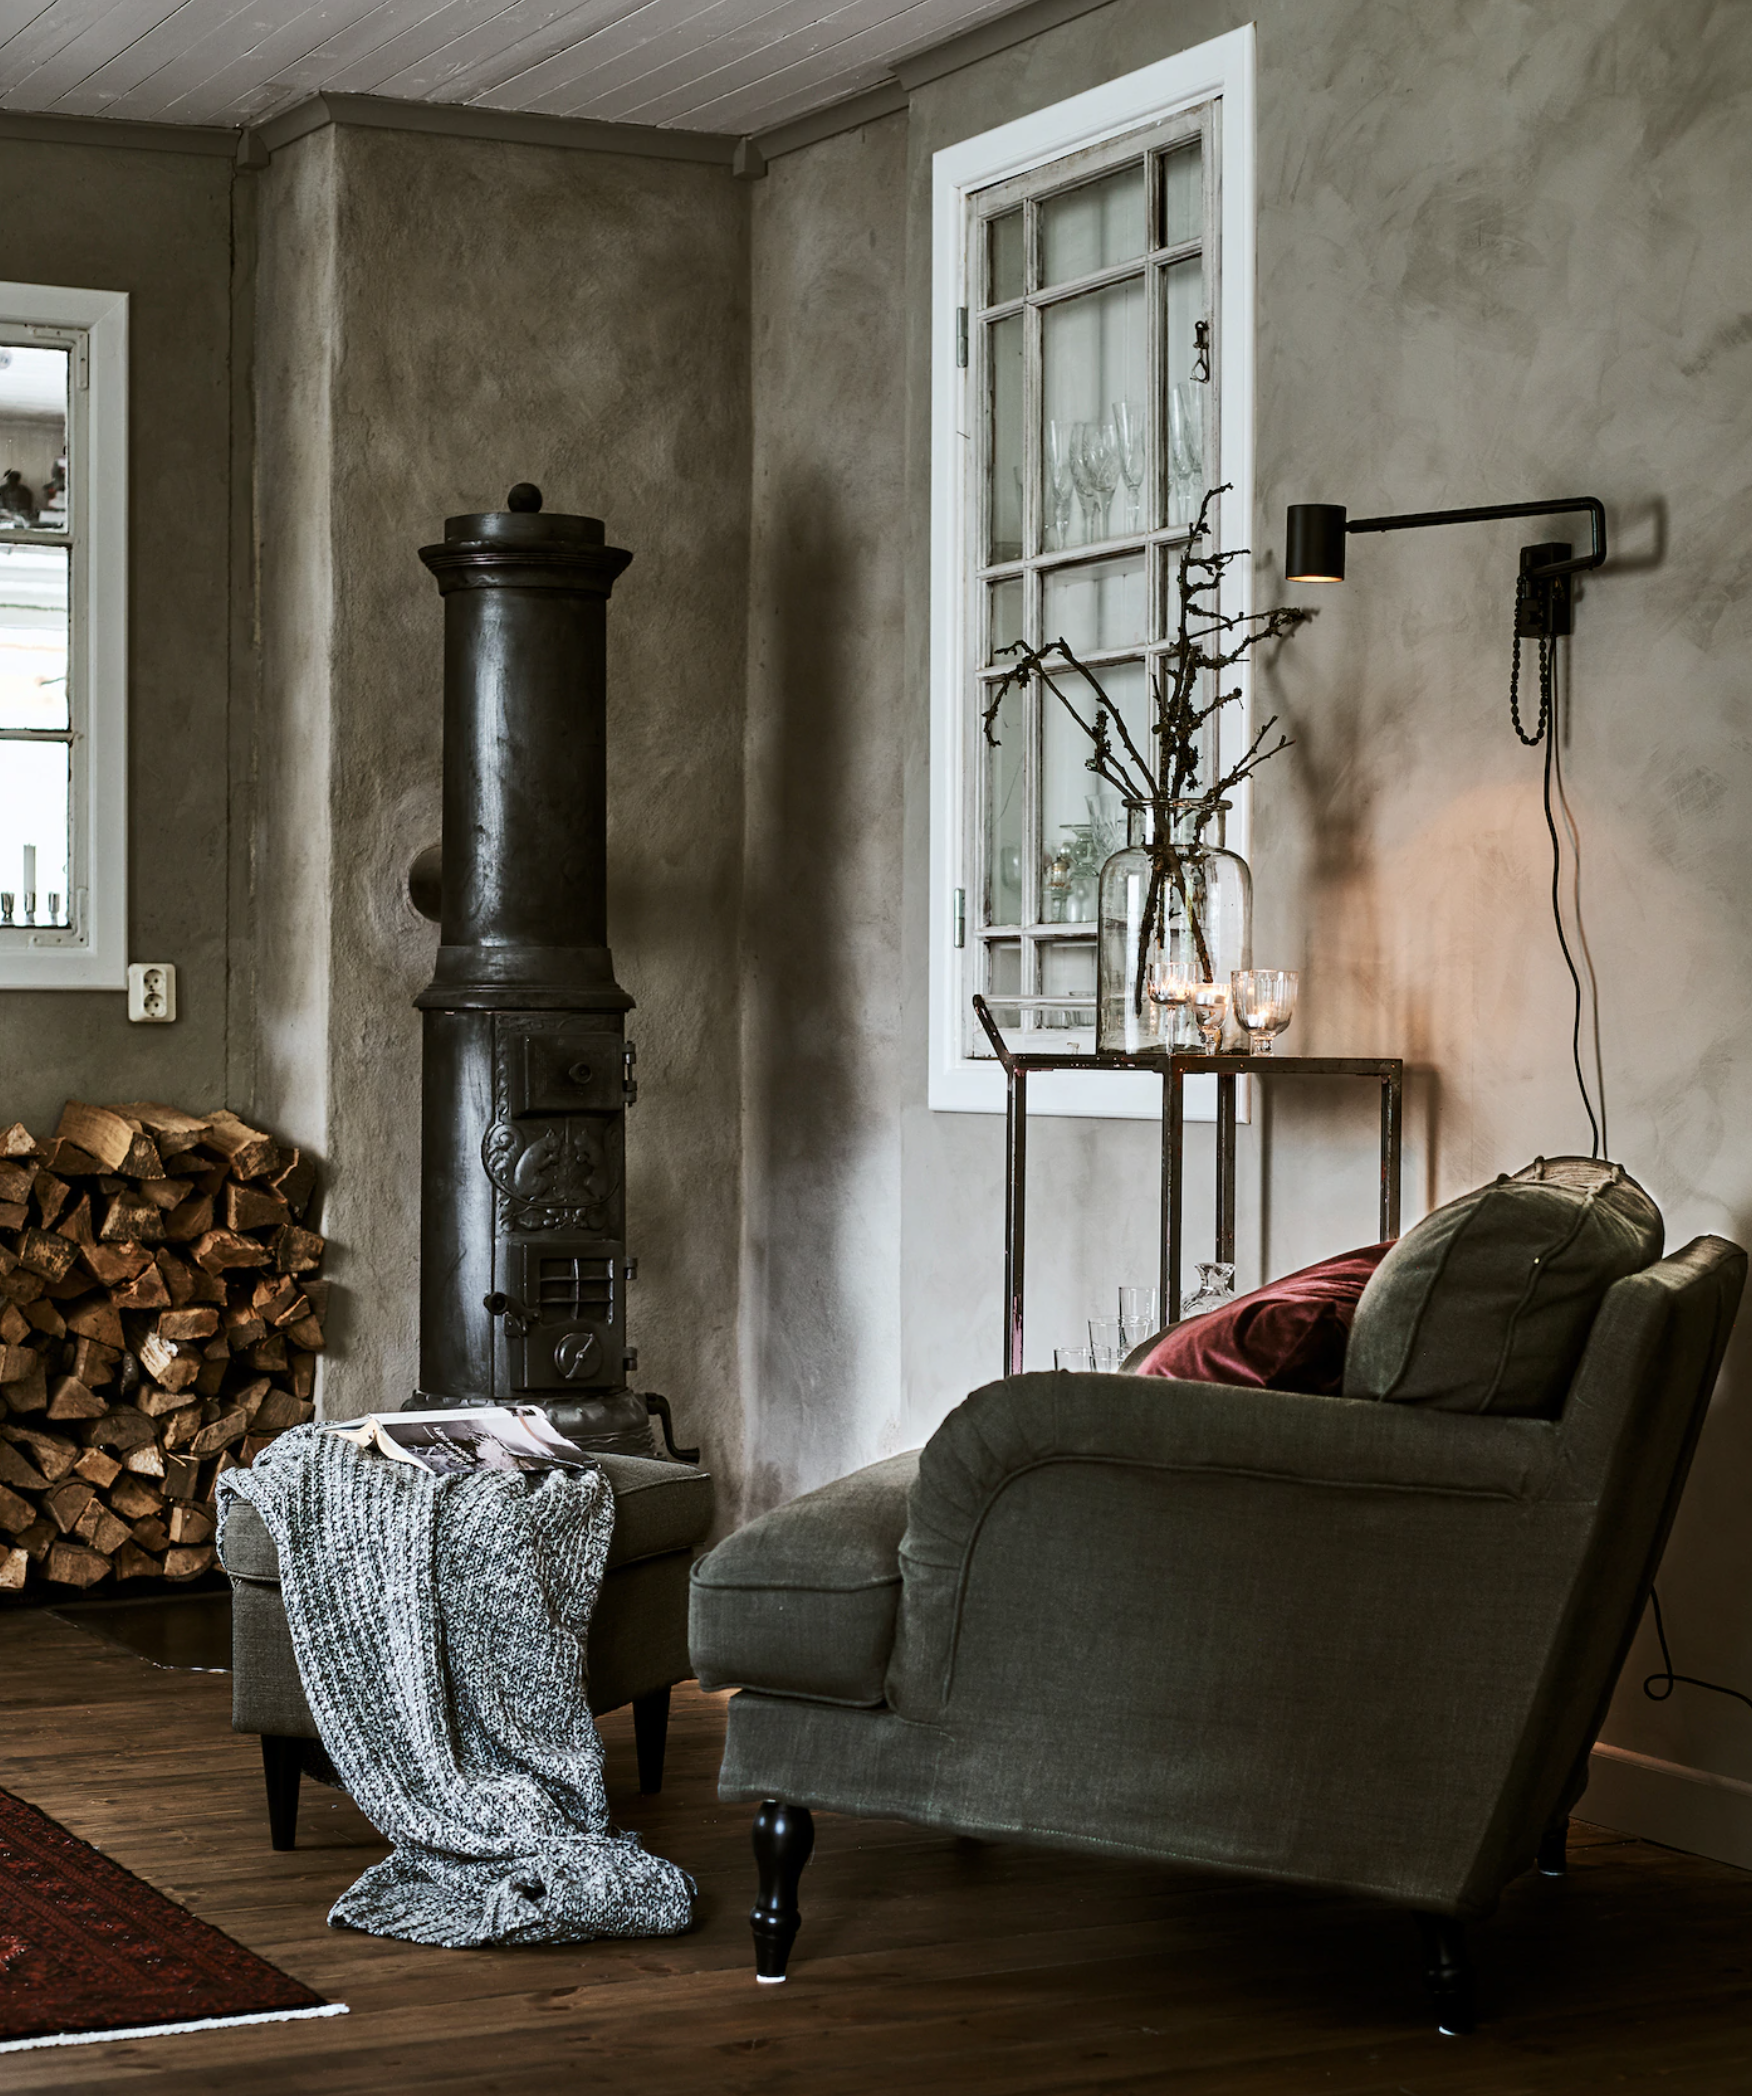 A grey living room or snug with black fireplace, grey armchair, concrete walls and logs in corner for burning